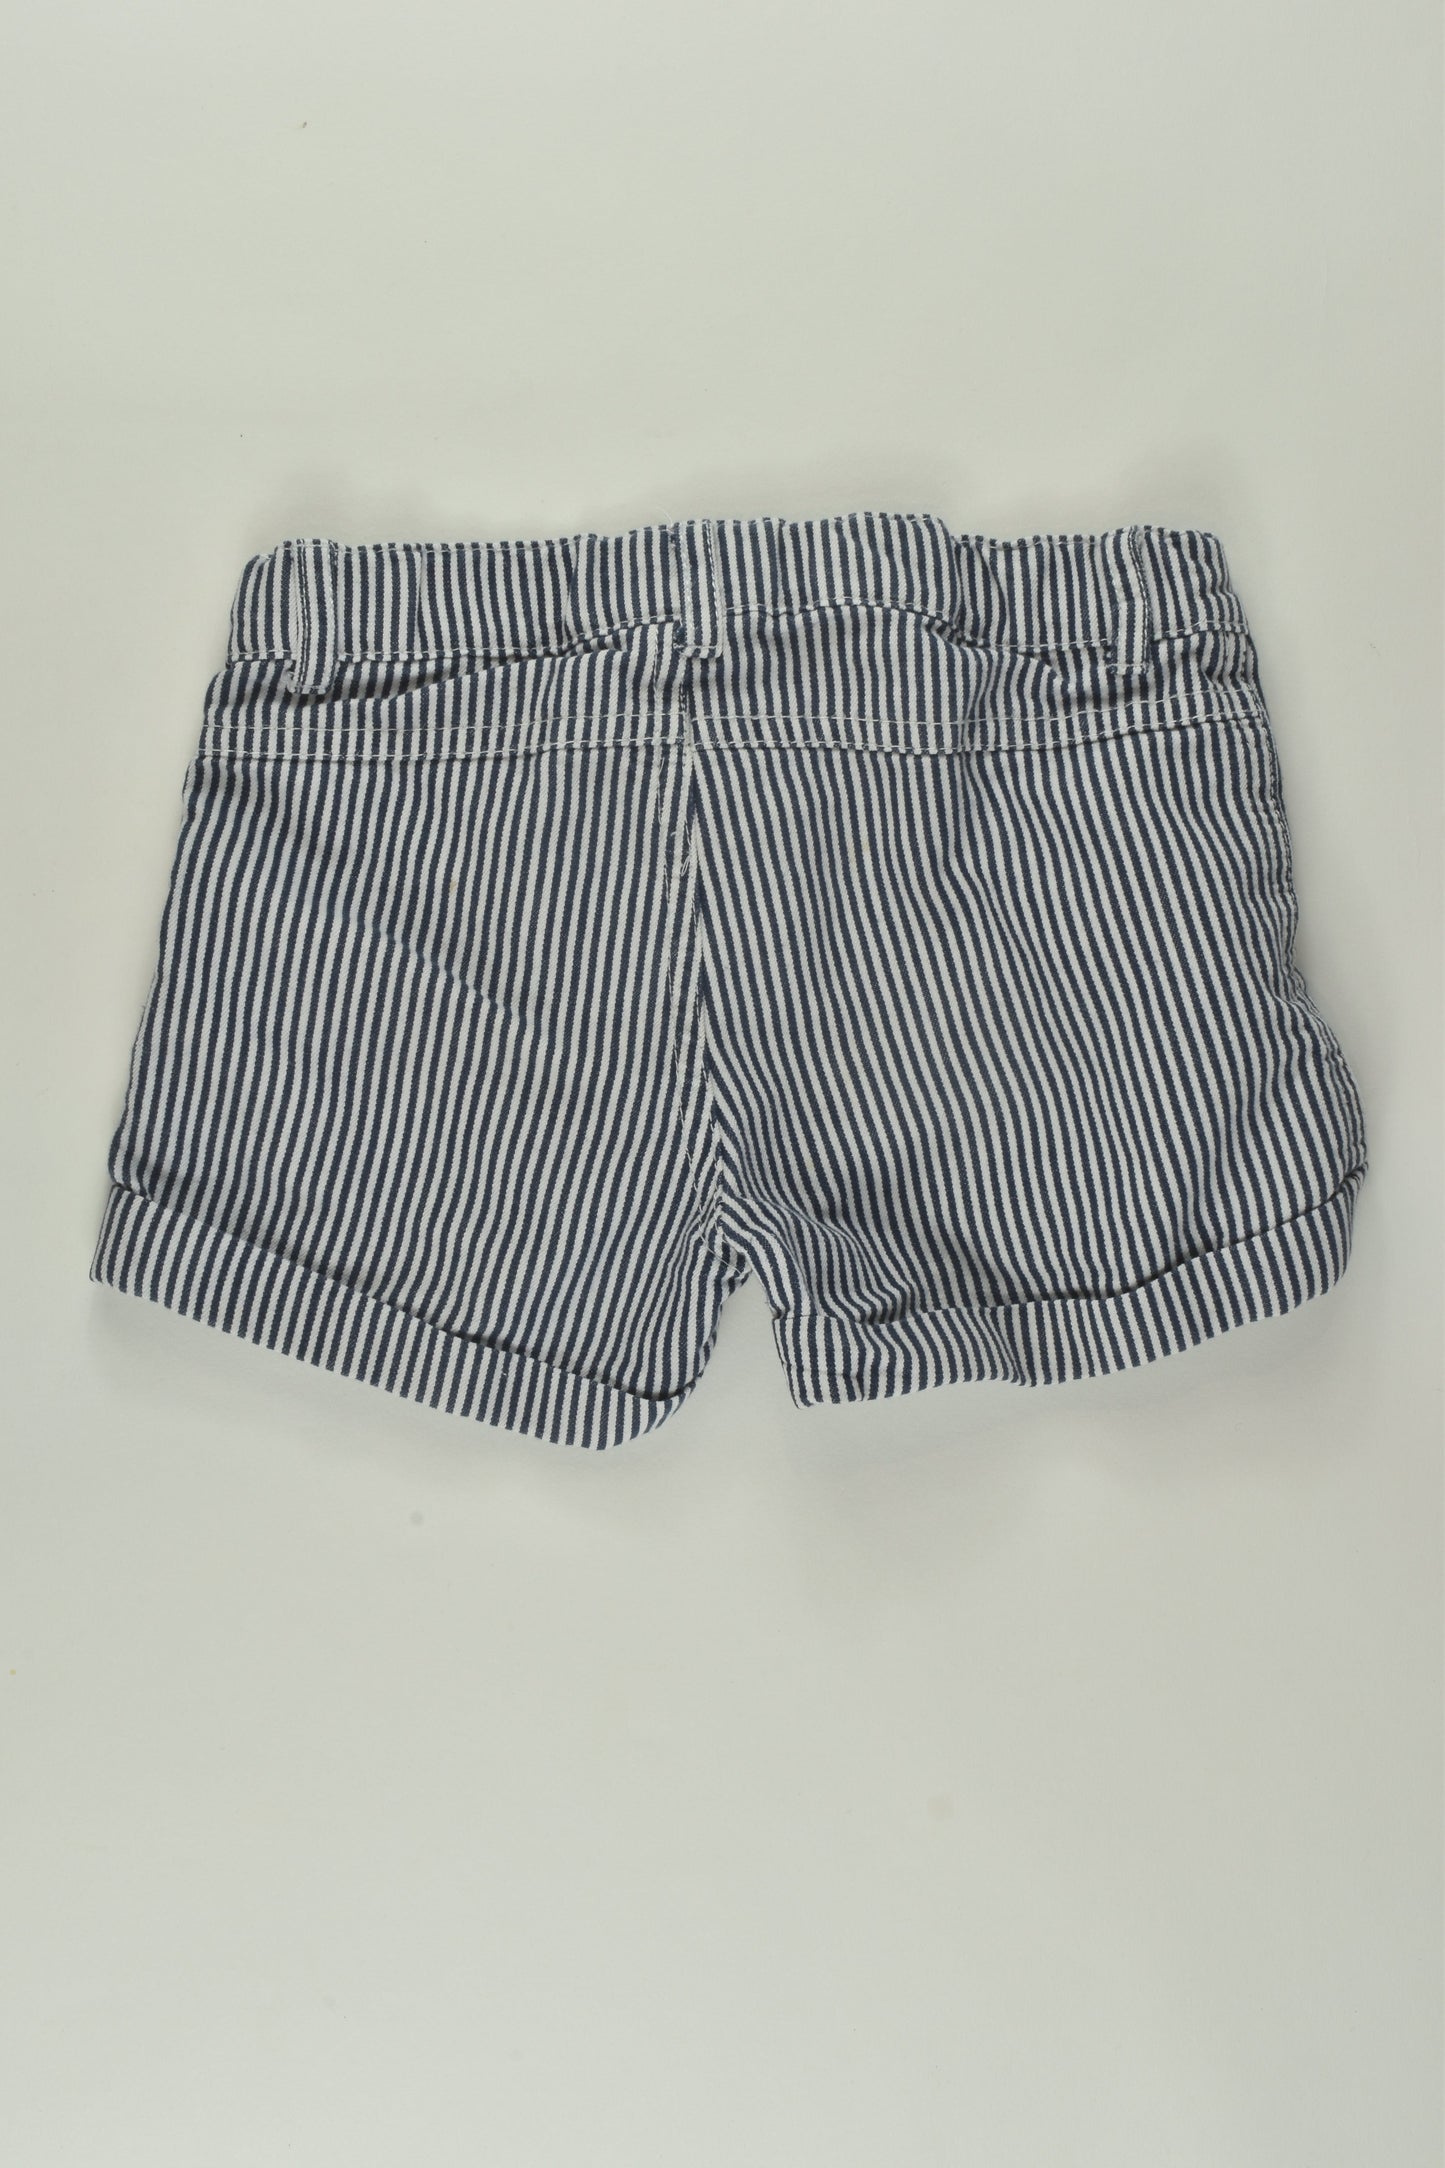 Target Size 2 Striped Shorts